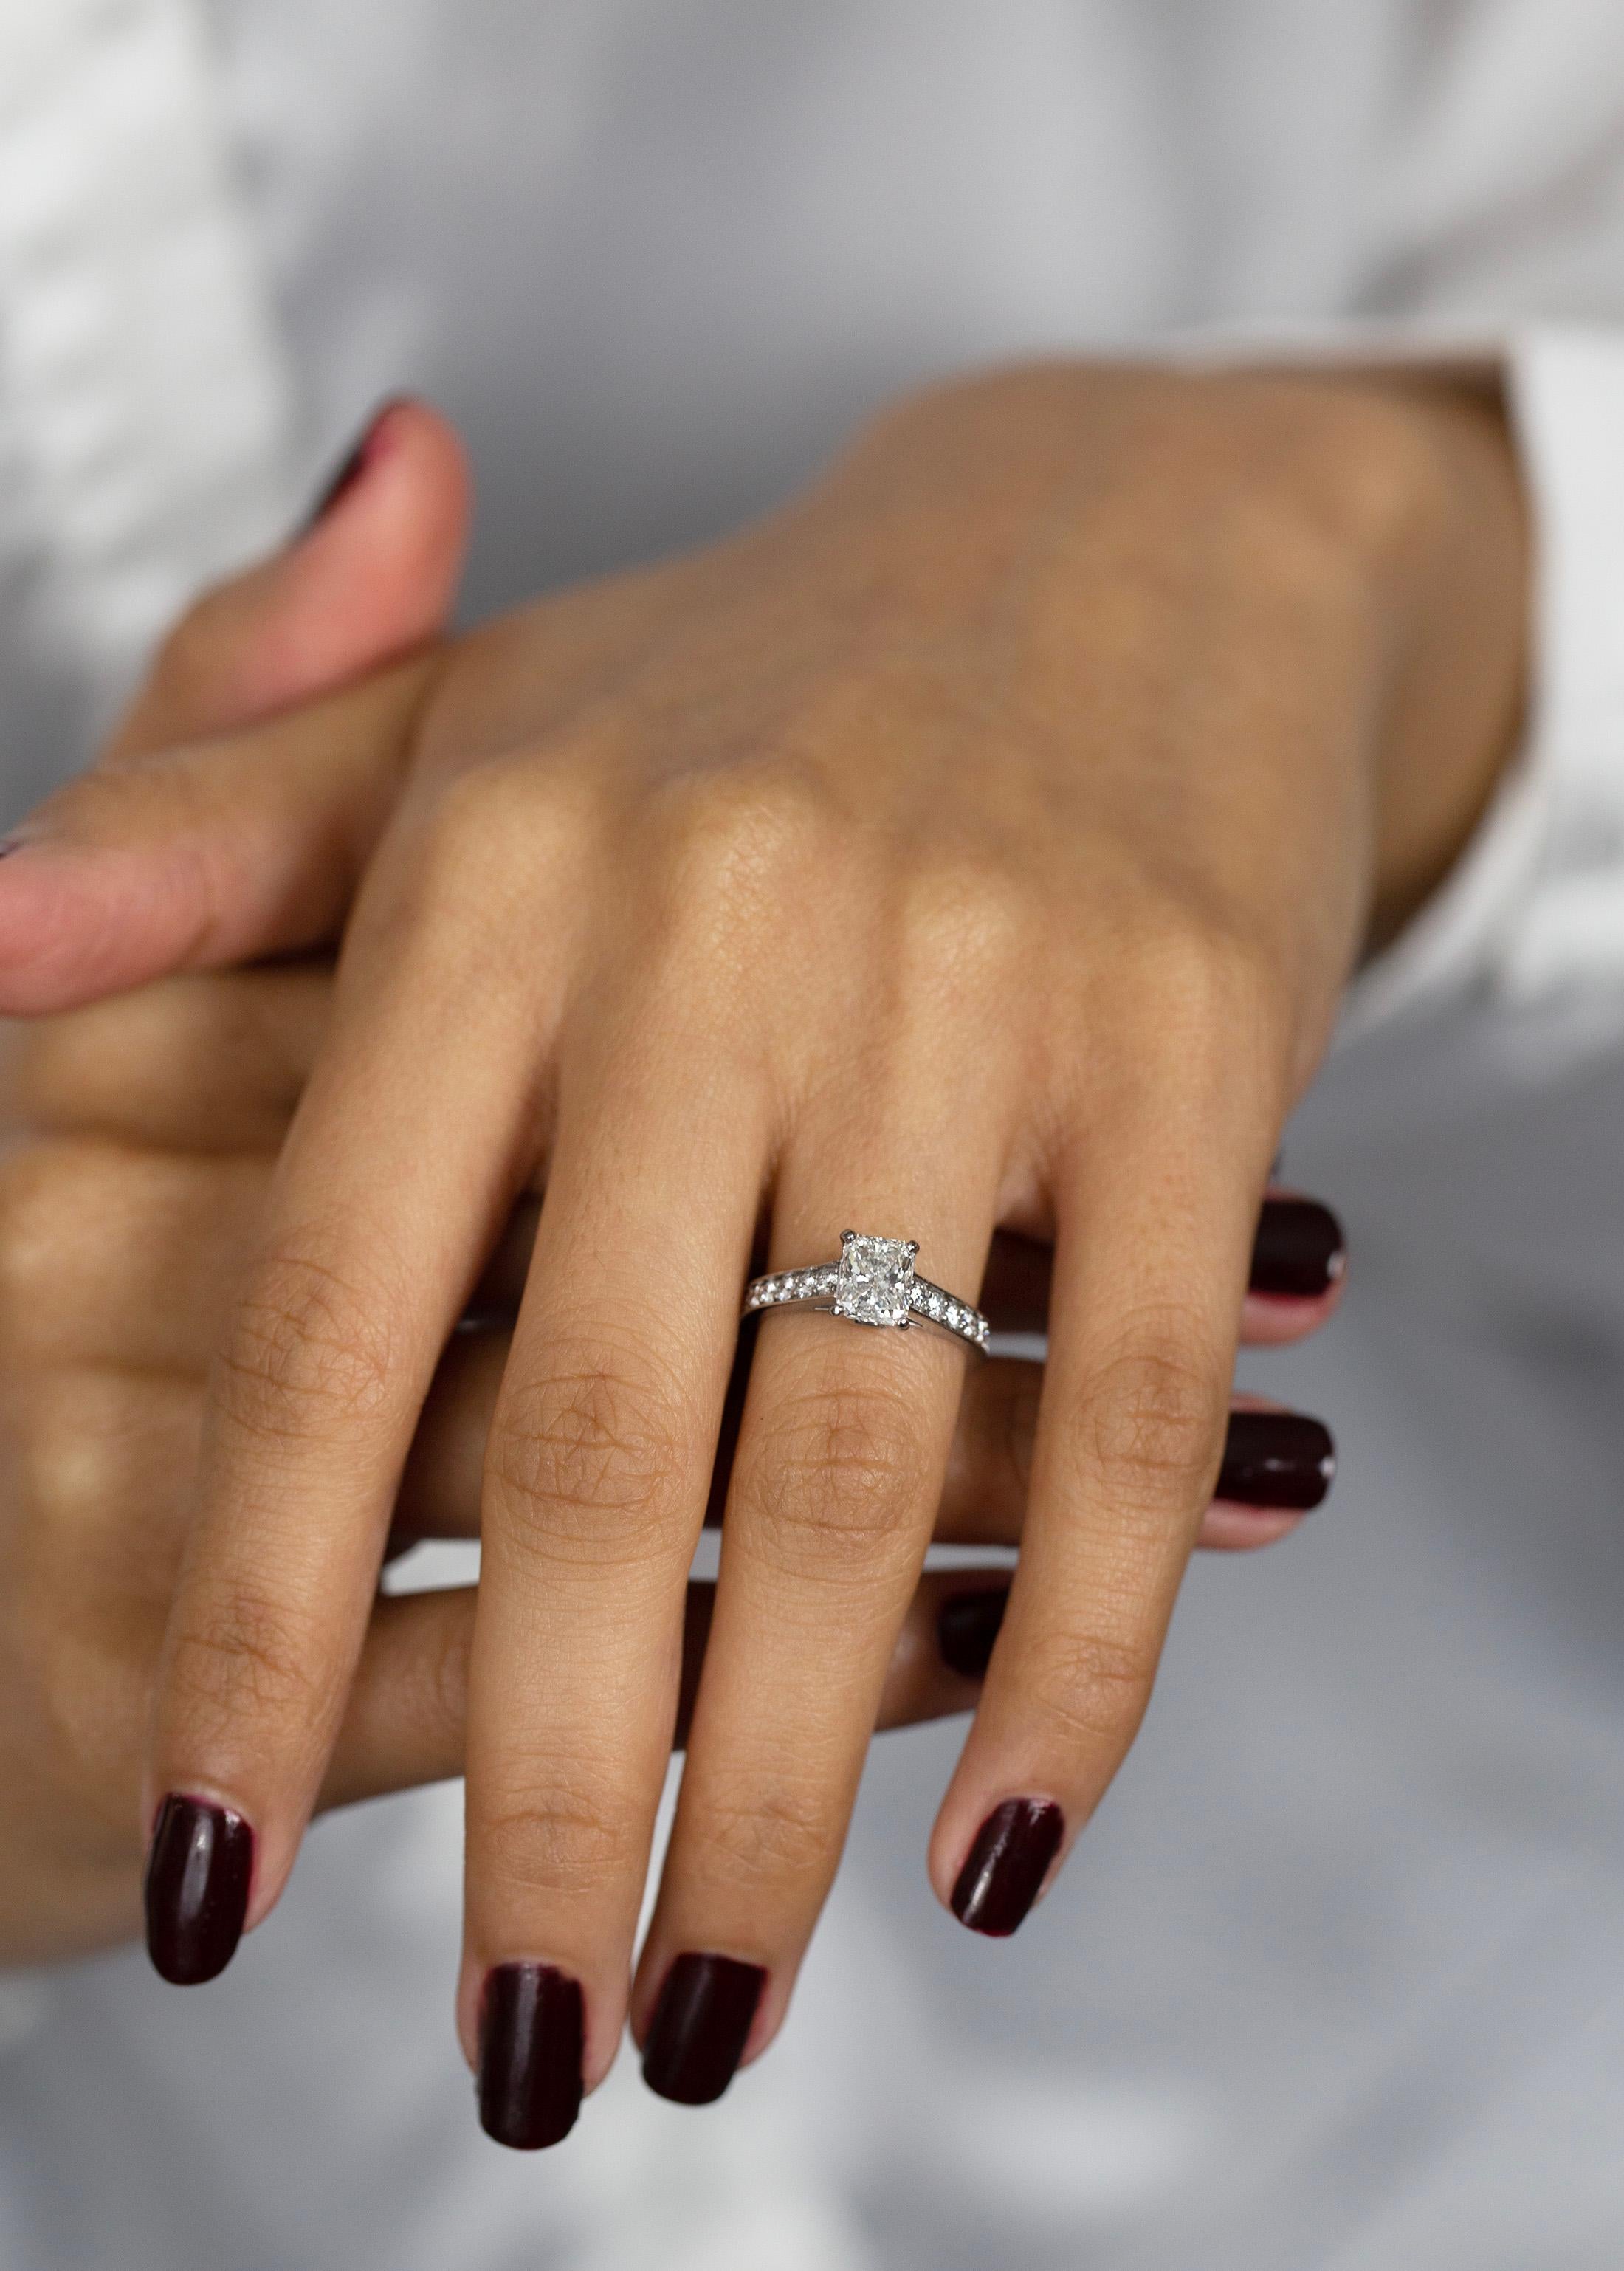 The 33 most jaw-dropping celebrity engagement rings of all time